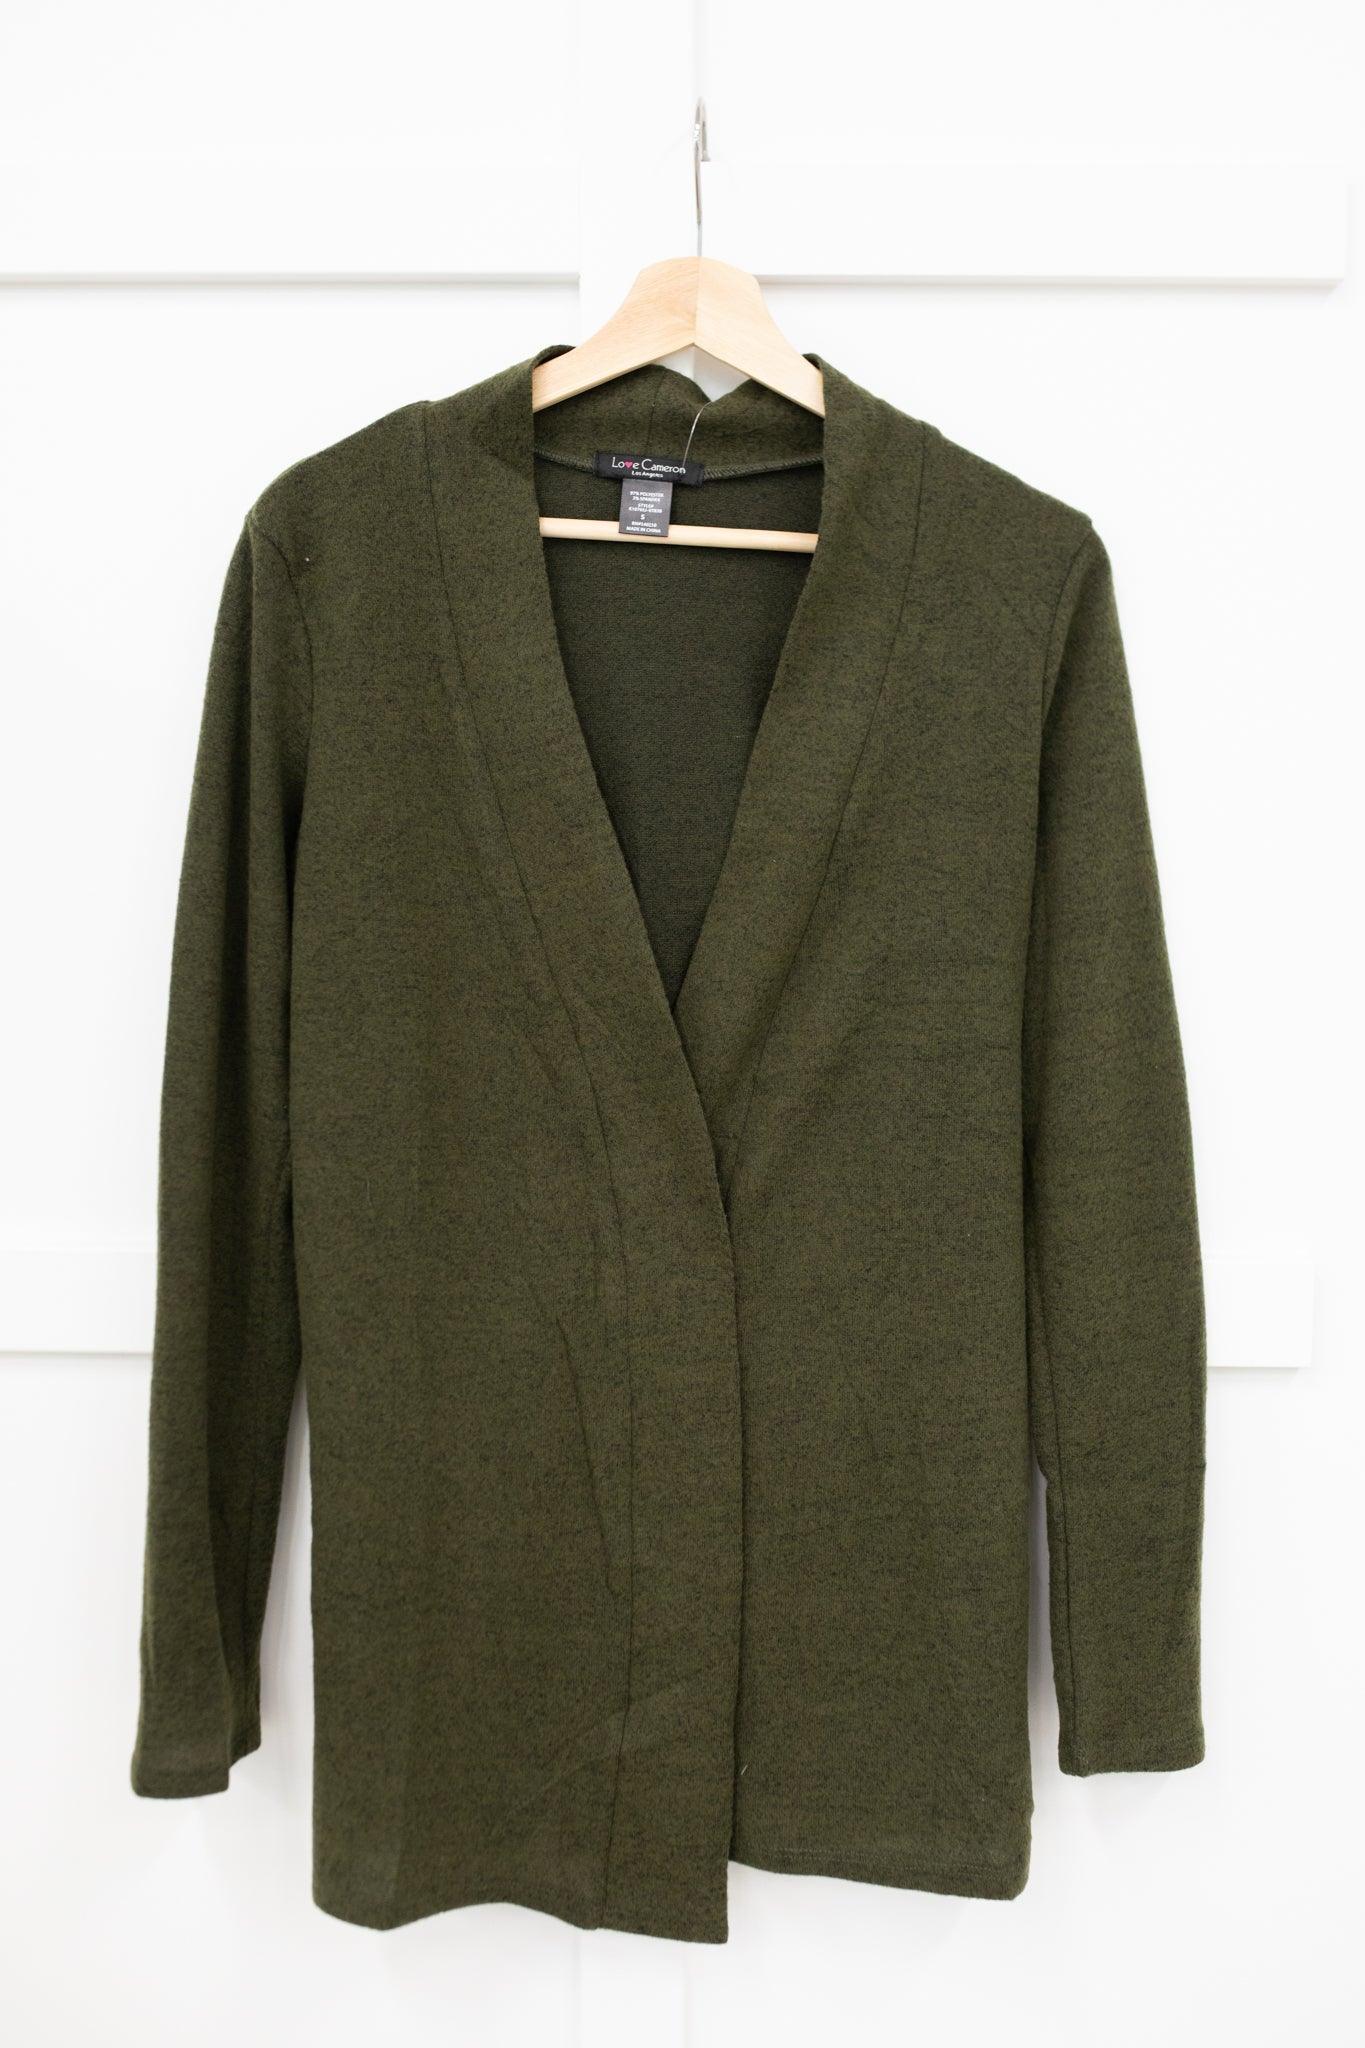 Sienna Sweater knit Cardigan In Olive - Alexander Jane Boutique  Womens